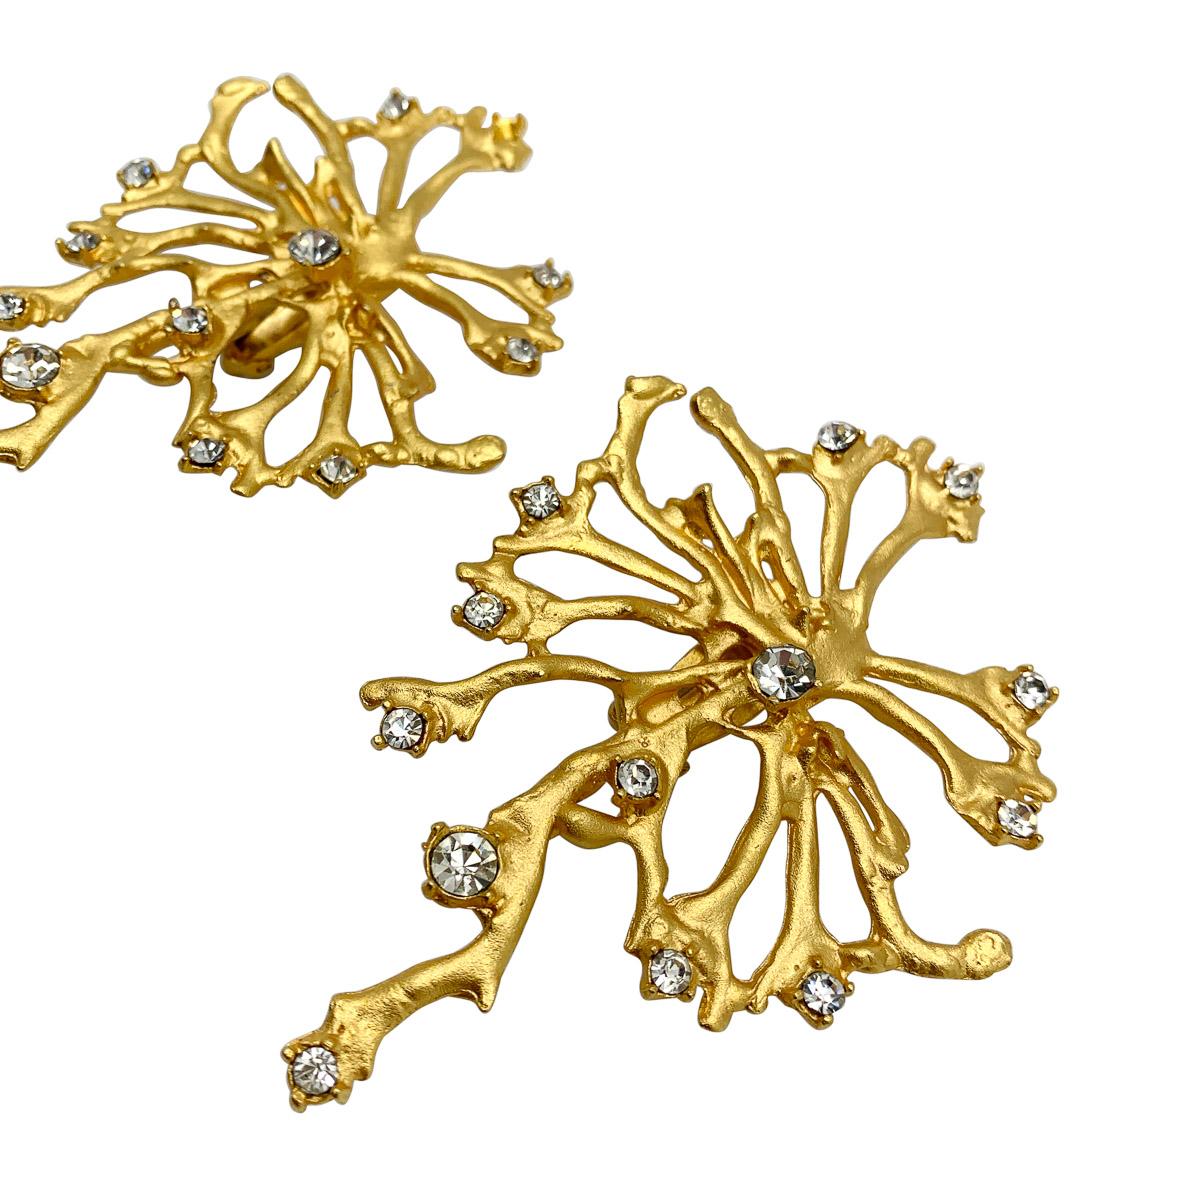 A huge pair of Vintage Coral Branch Earrings. Featuring exquisitely modelled branches of coral in a matt gold finish, embellished with chaton crystals for a fabulous effect. A drop-dead gorgeous pair of earrings that will elevate your unique